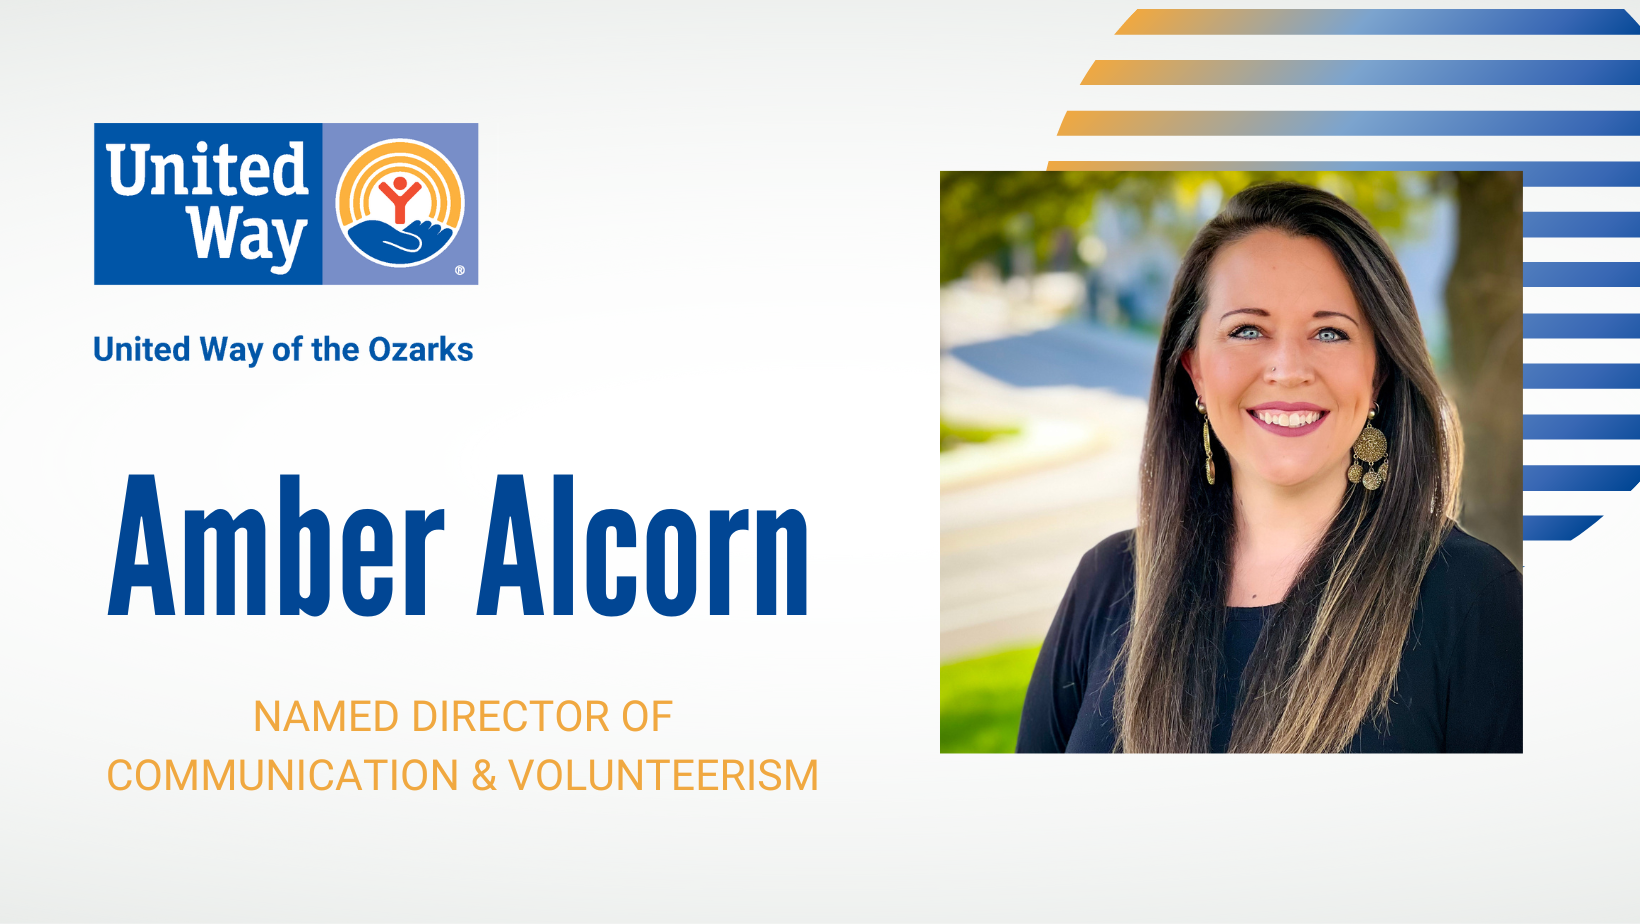 Featured image for “Amber Alcorn named Director of Communication & Volunteerism”